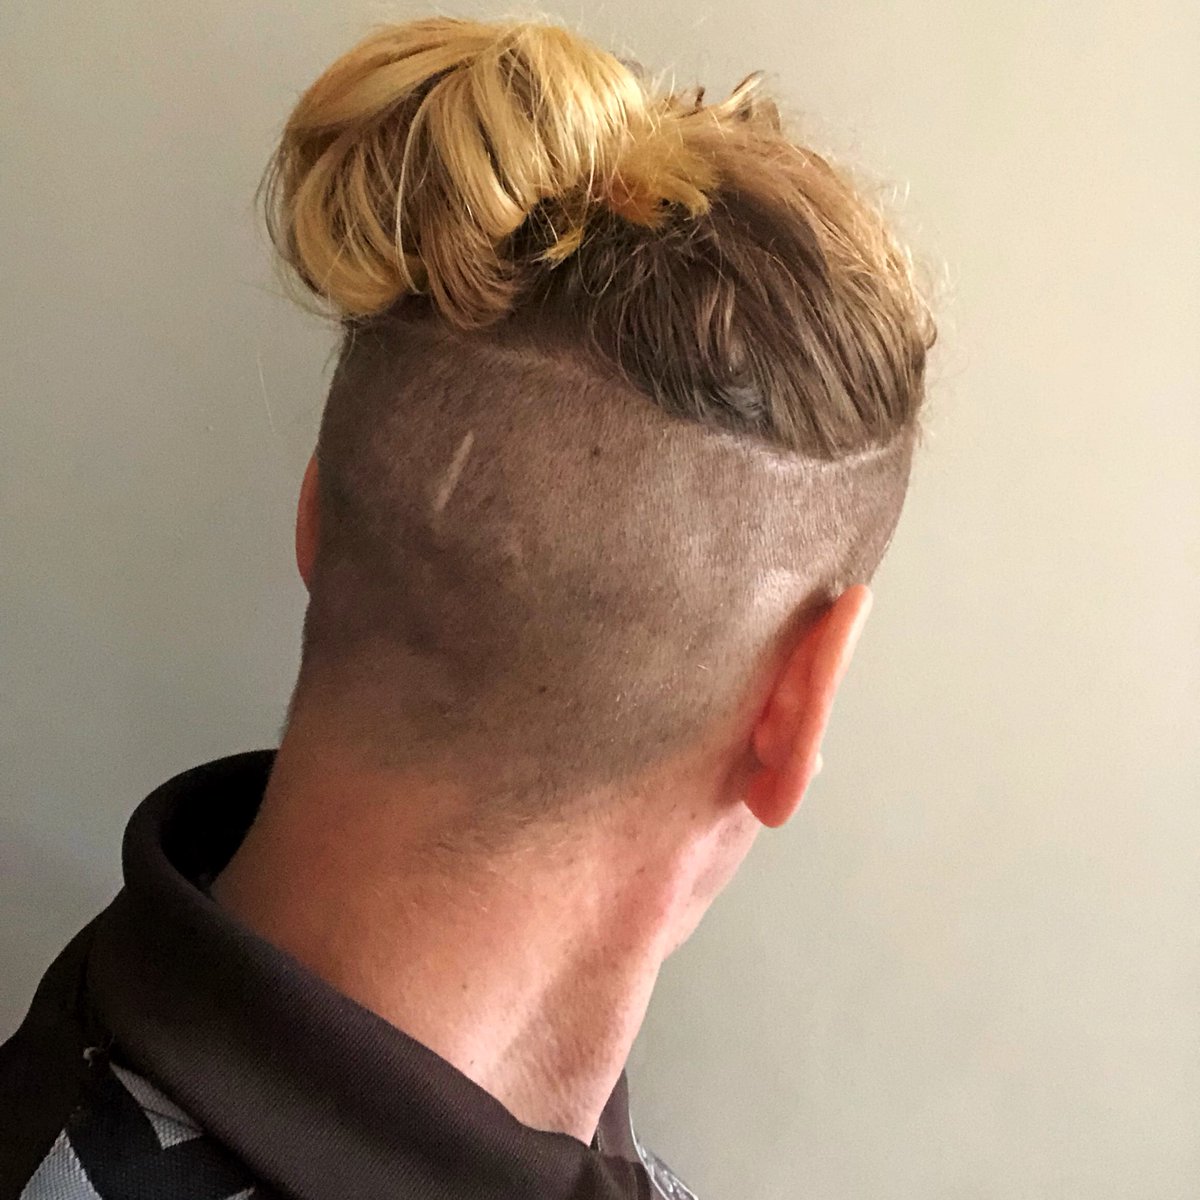 Nick On Twitter Back To School Diy Haircut Would